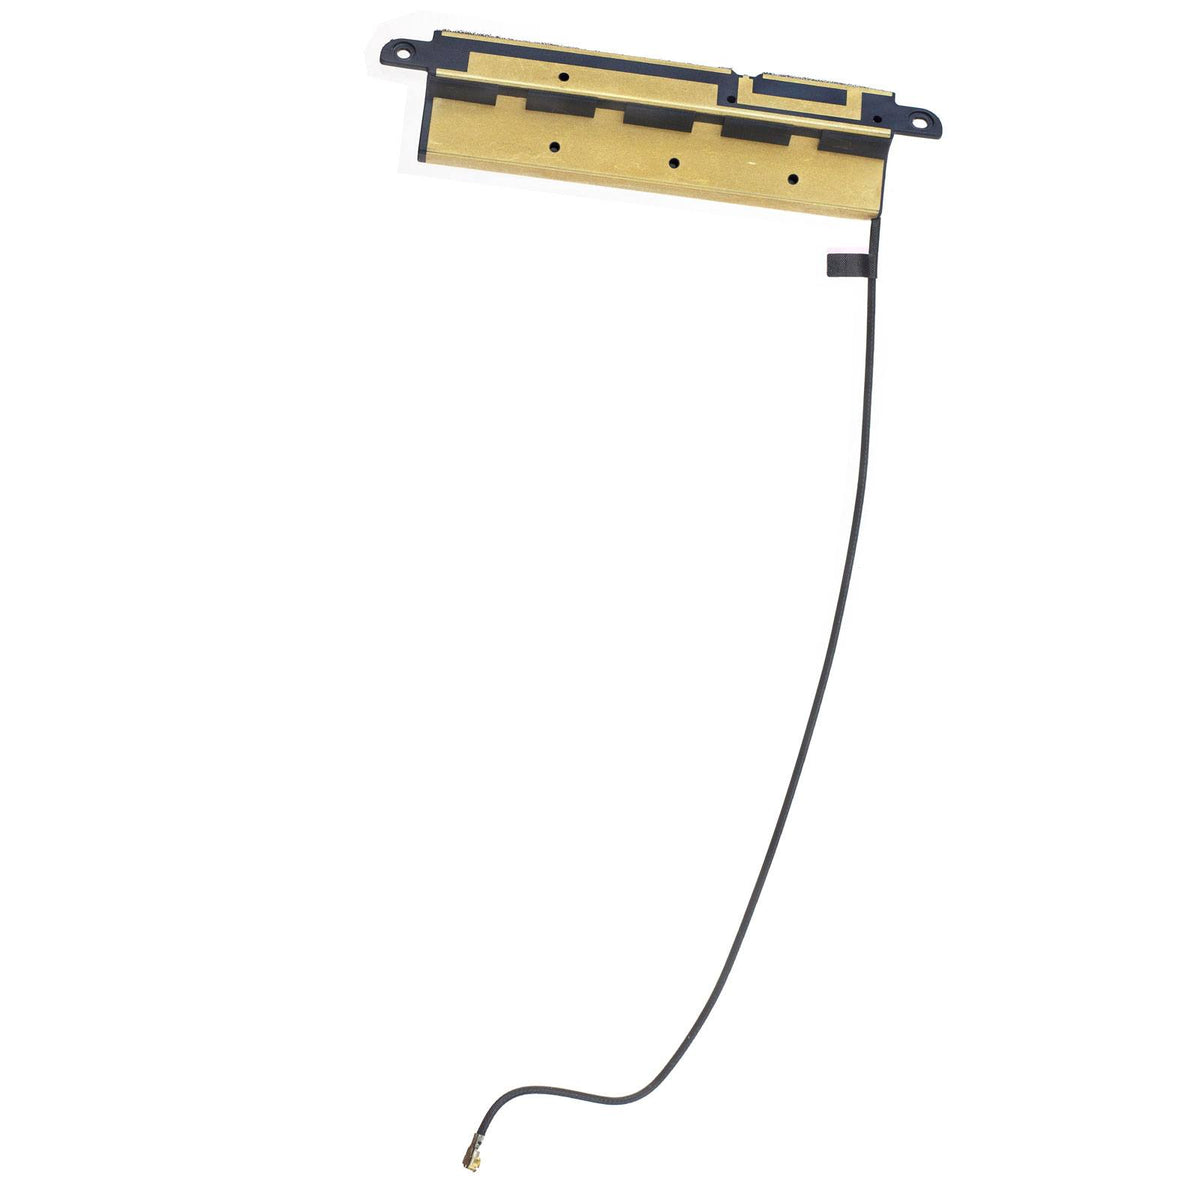 MID/LOWER WIFI ANTENNA FOR IMAC 27" A1419 (LATE 2012, MID 2015)